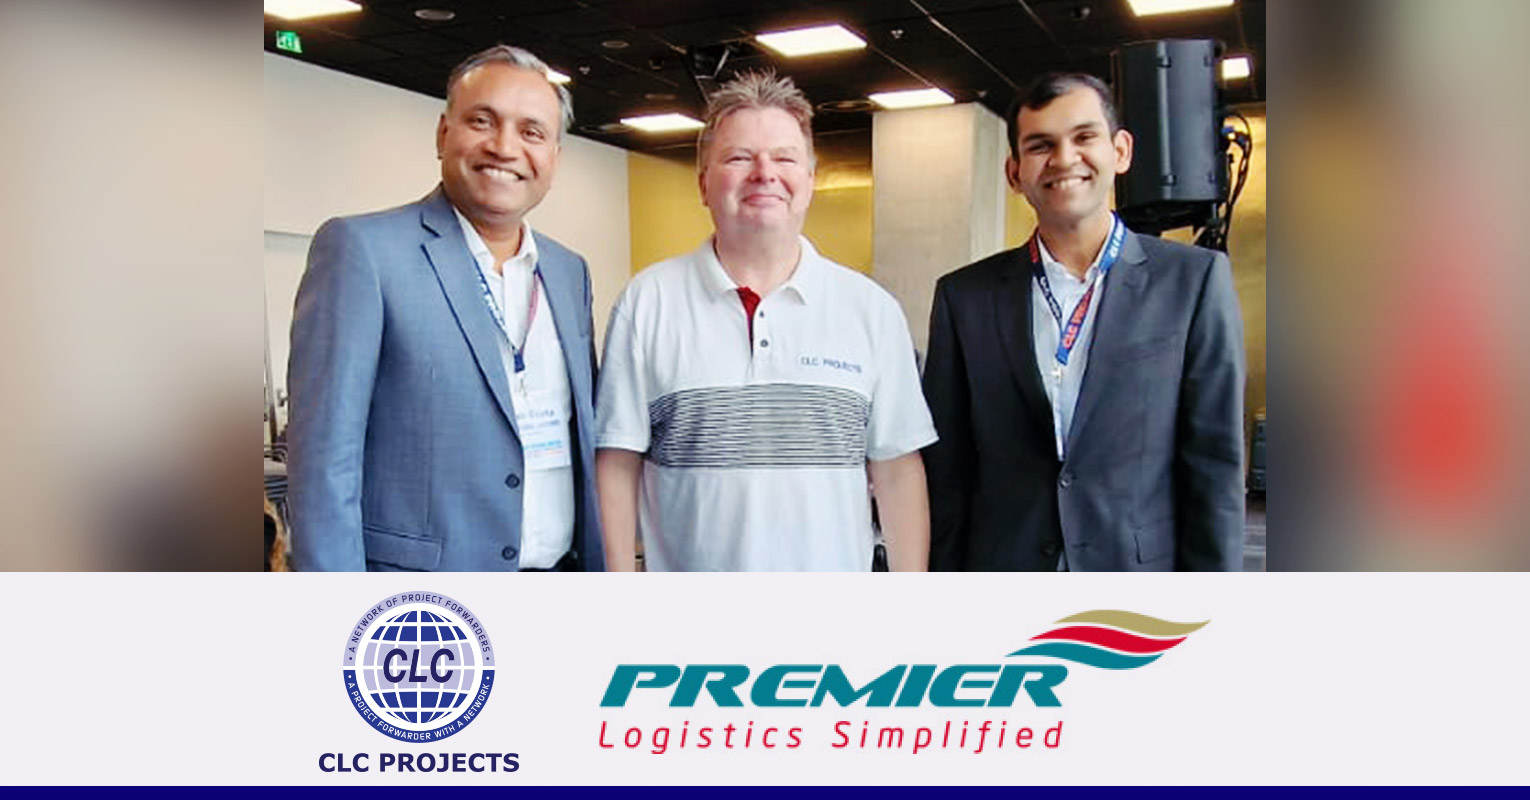 Rajesh Gupta & Akshay Gupta of Premier Global Logistics and CLC Projects Chairman at today's joint network meeting in Rotterdam